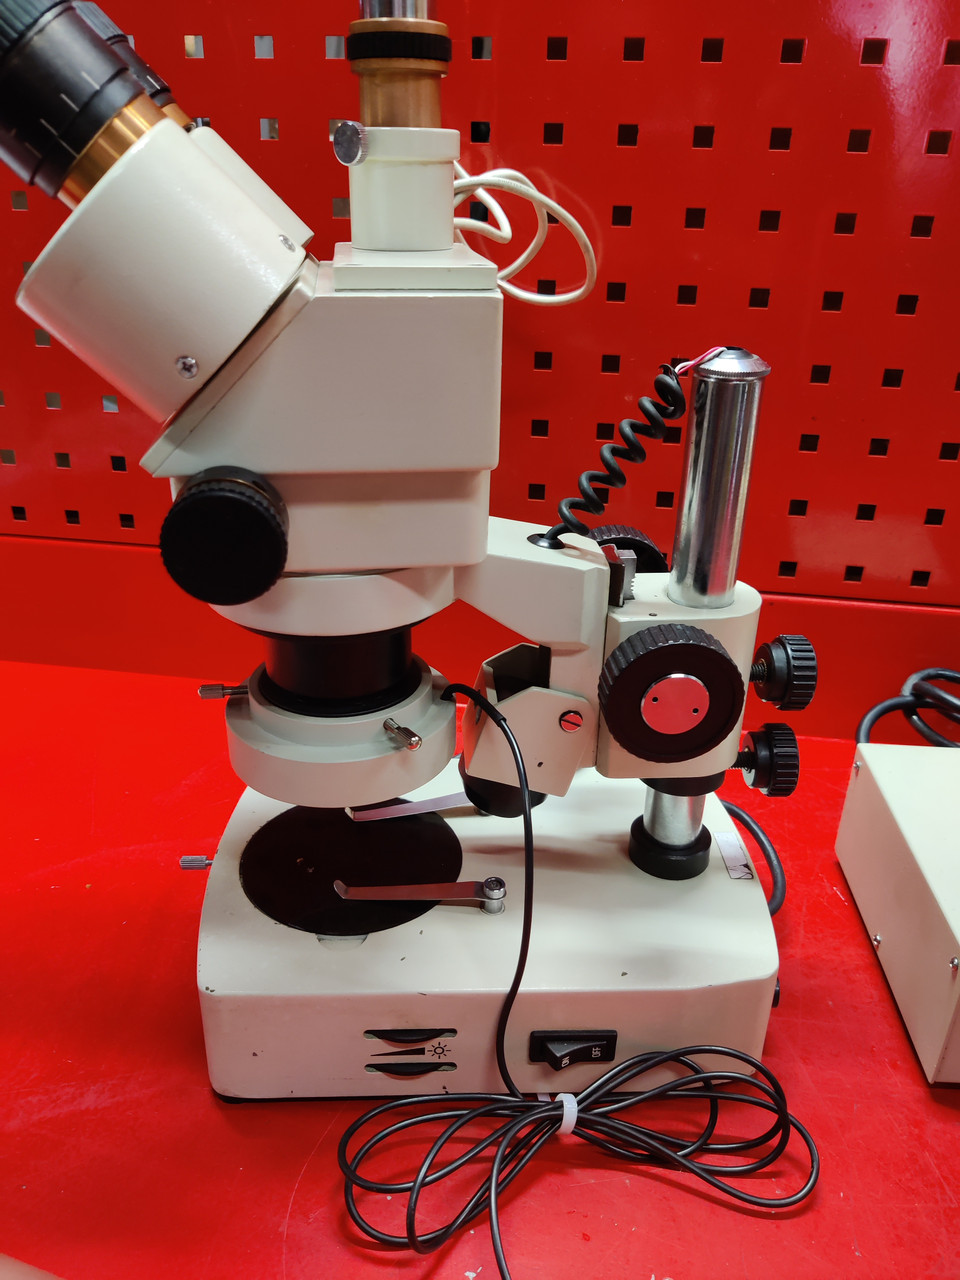 Mitutoyo 0411954 Binocular Stereo Microscope w/ Extra light and USB Attachment for Screen Viewing